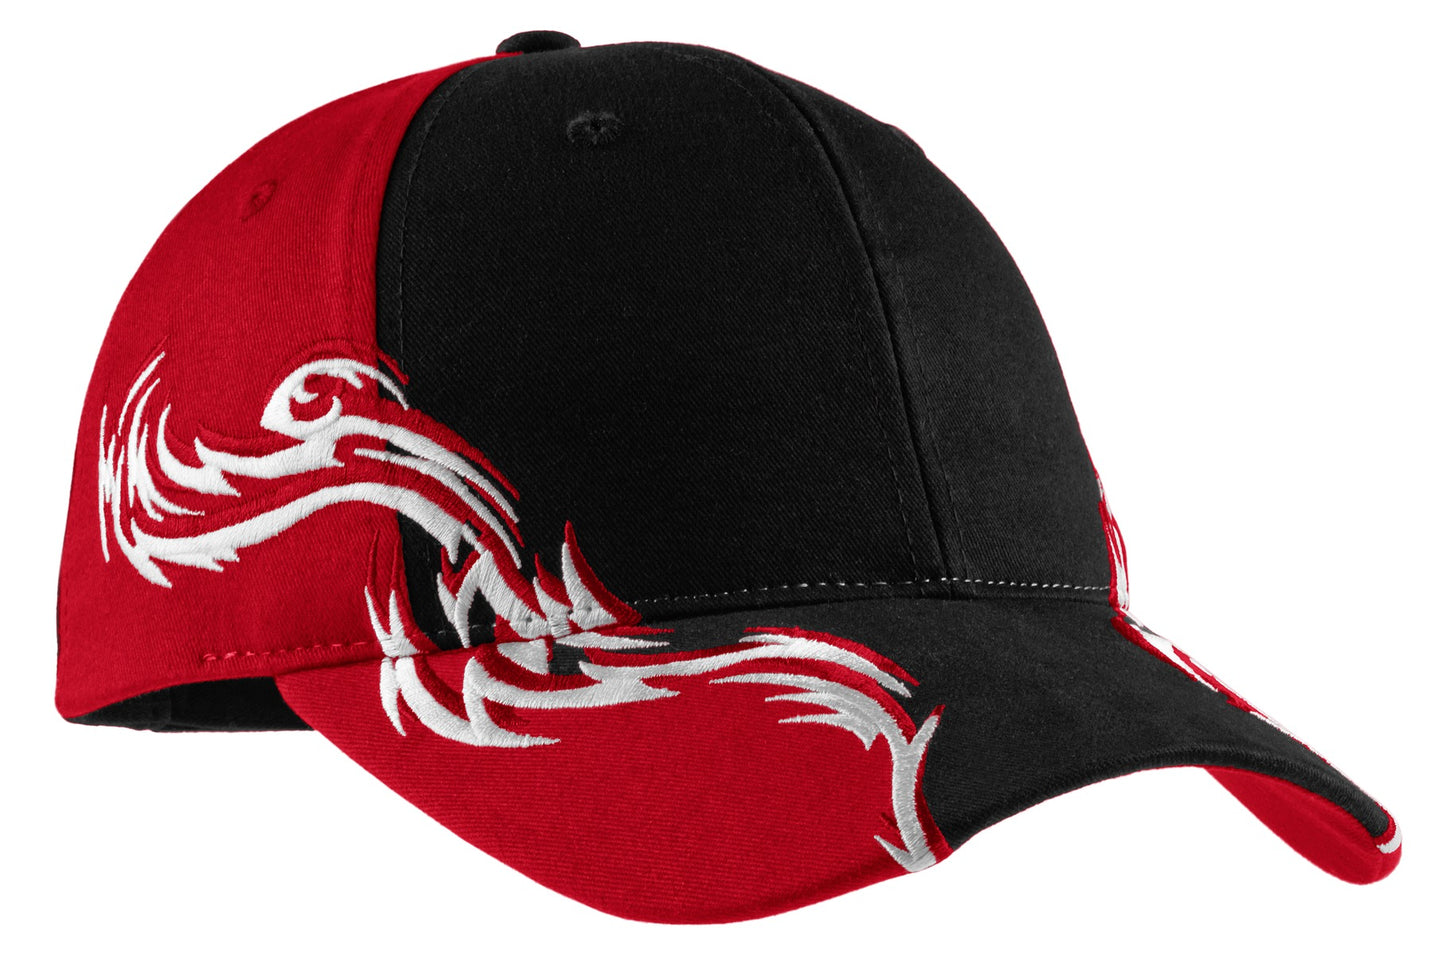 Port Authority Colorblock Racing Cap with Flames. C859